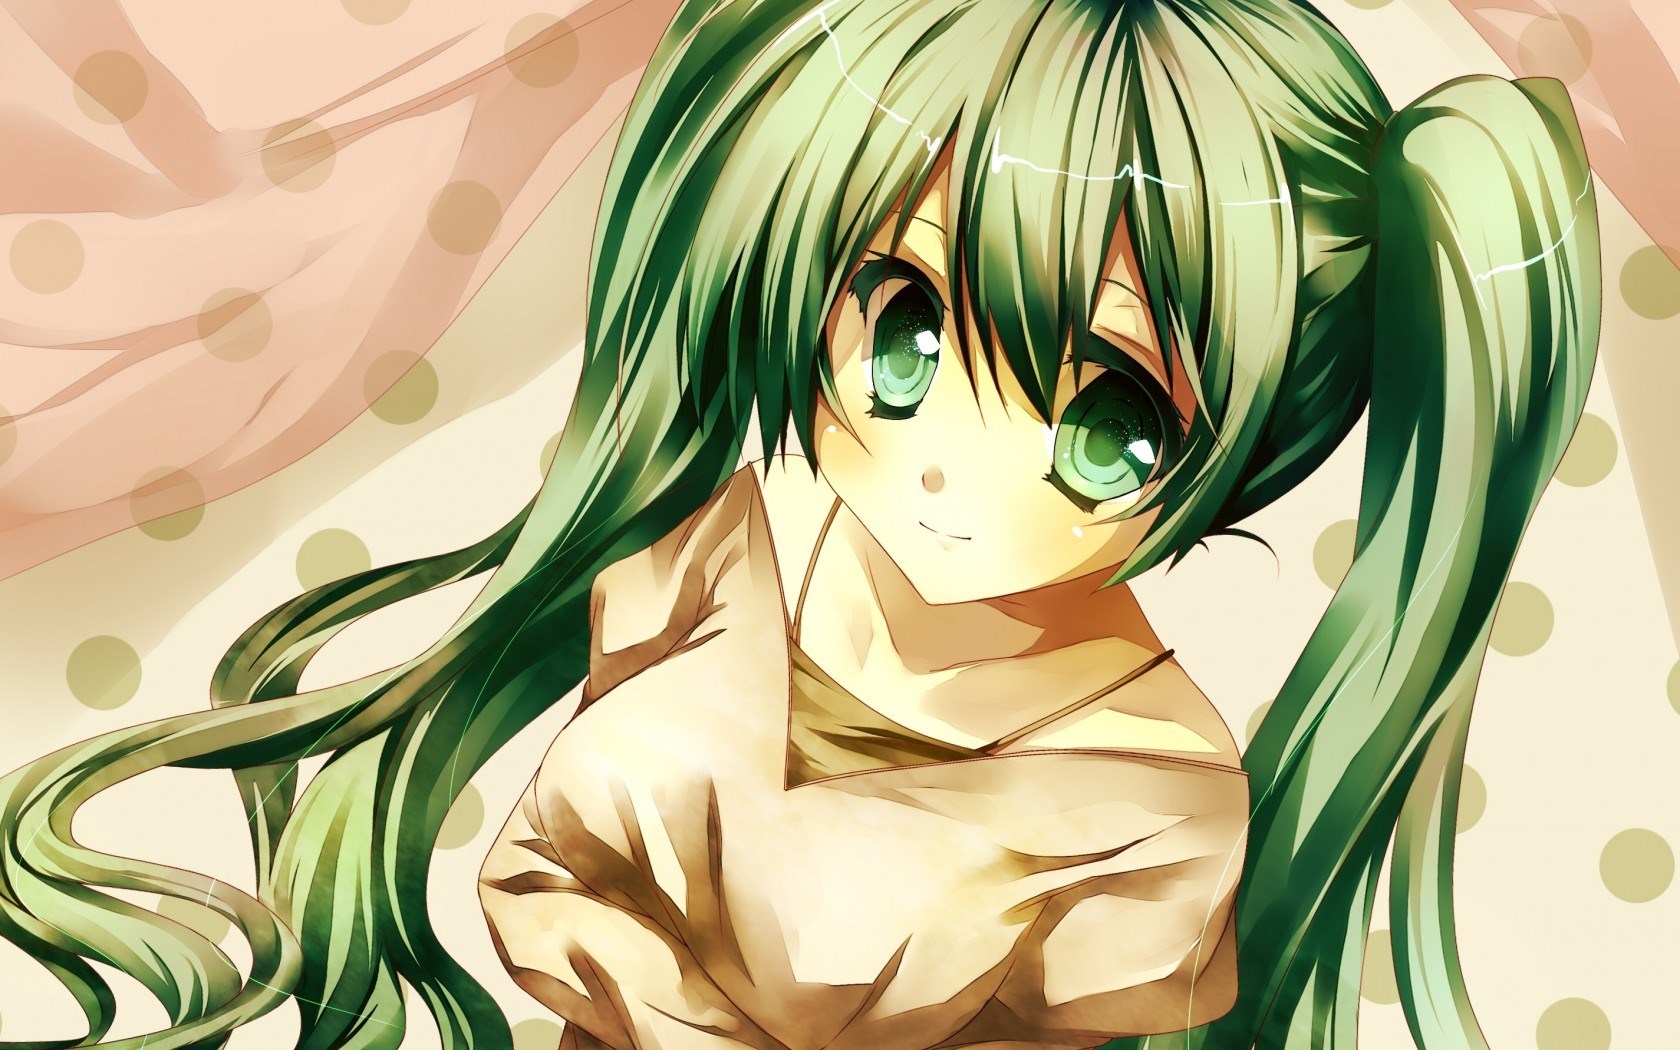 Blue-haired anime characters with green accents - wide 10